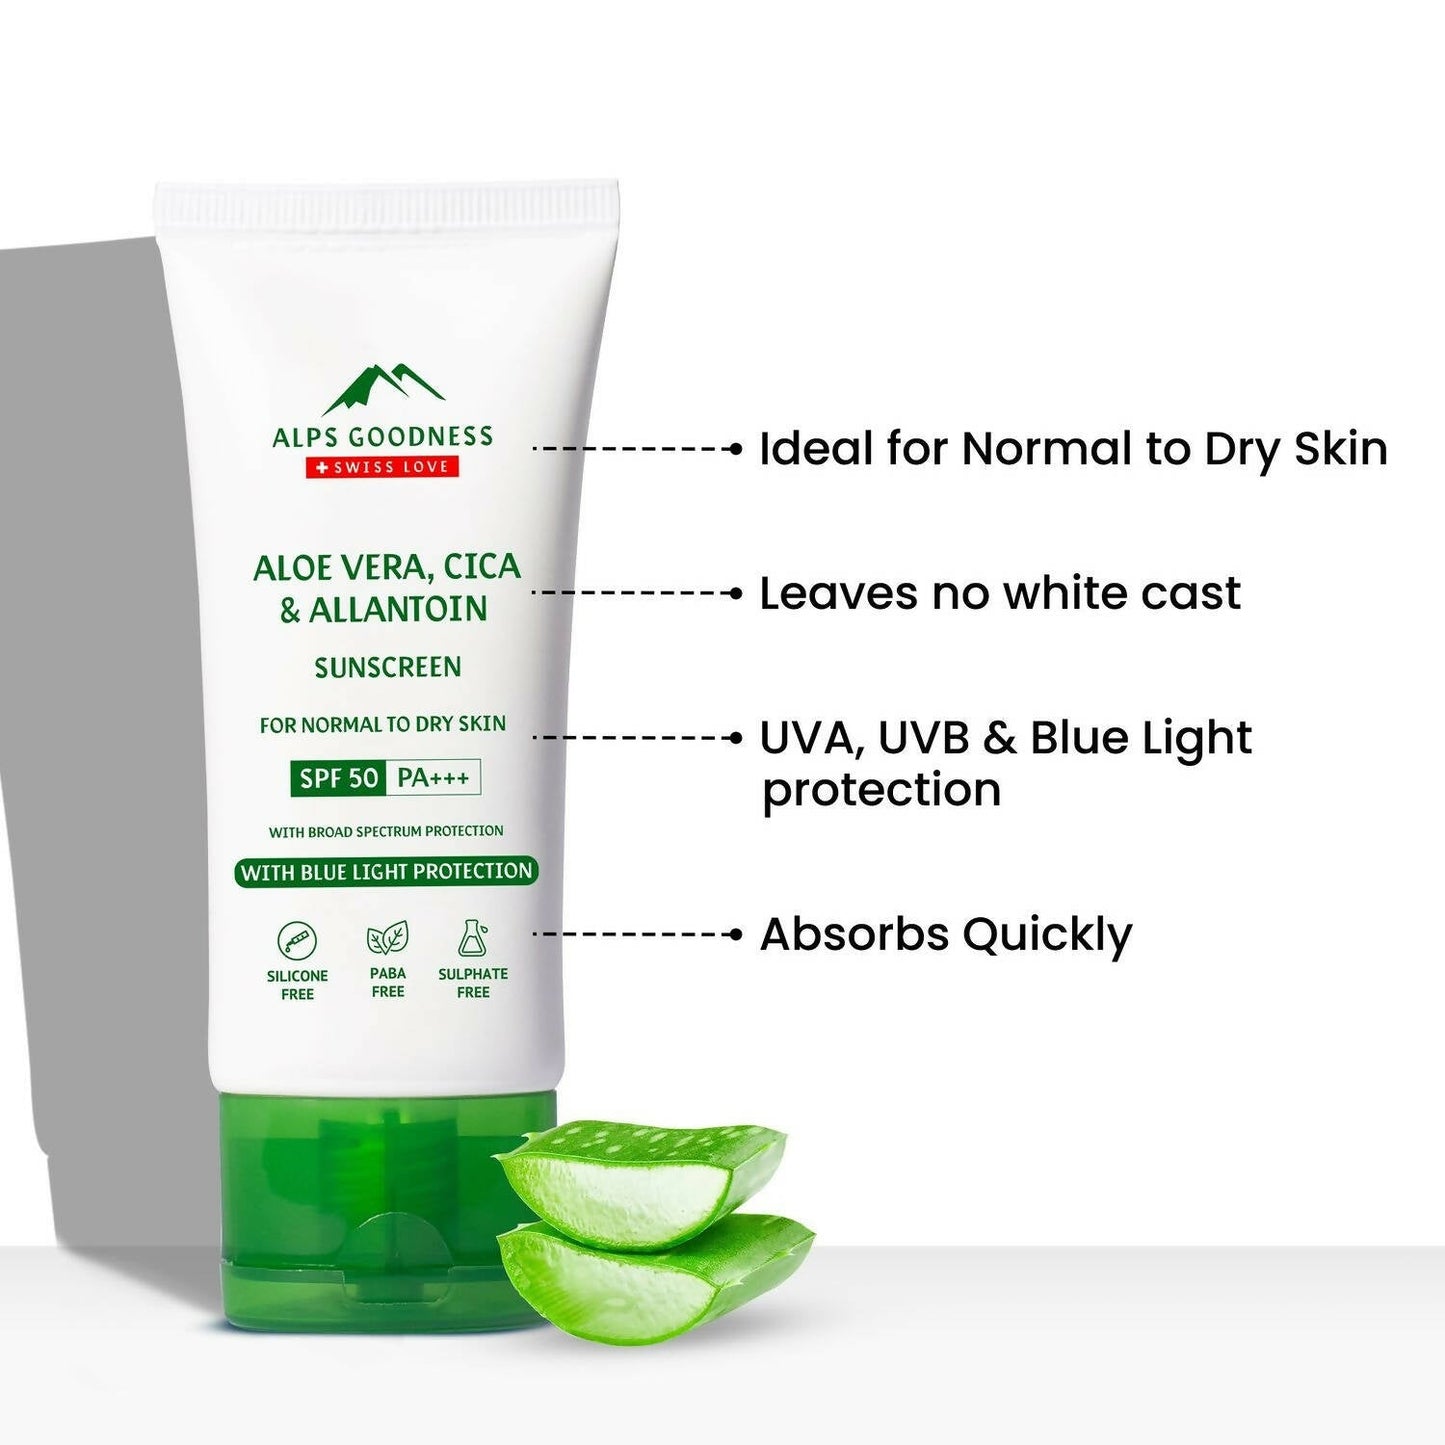 Alps Goodness Blue Light Protection Sunscreen For Normal to Dry Skin SPF 50 PA+++ with Aloe Vera, Cica & Allantoin